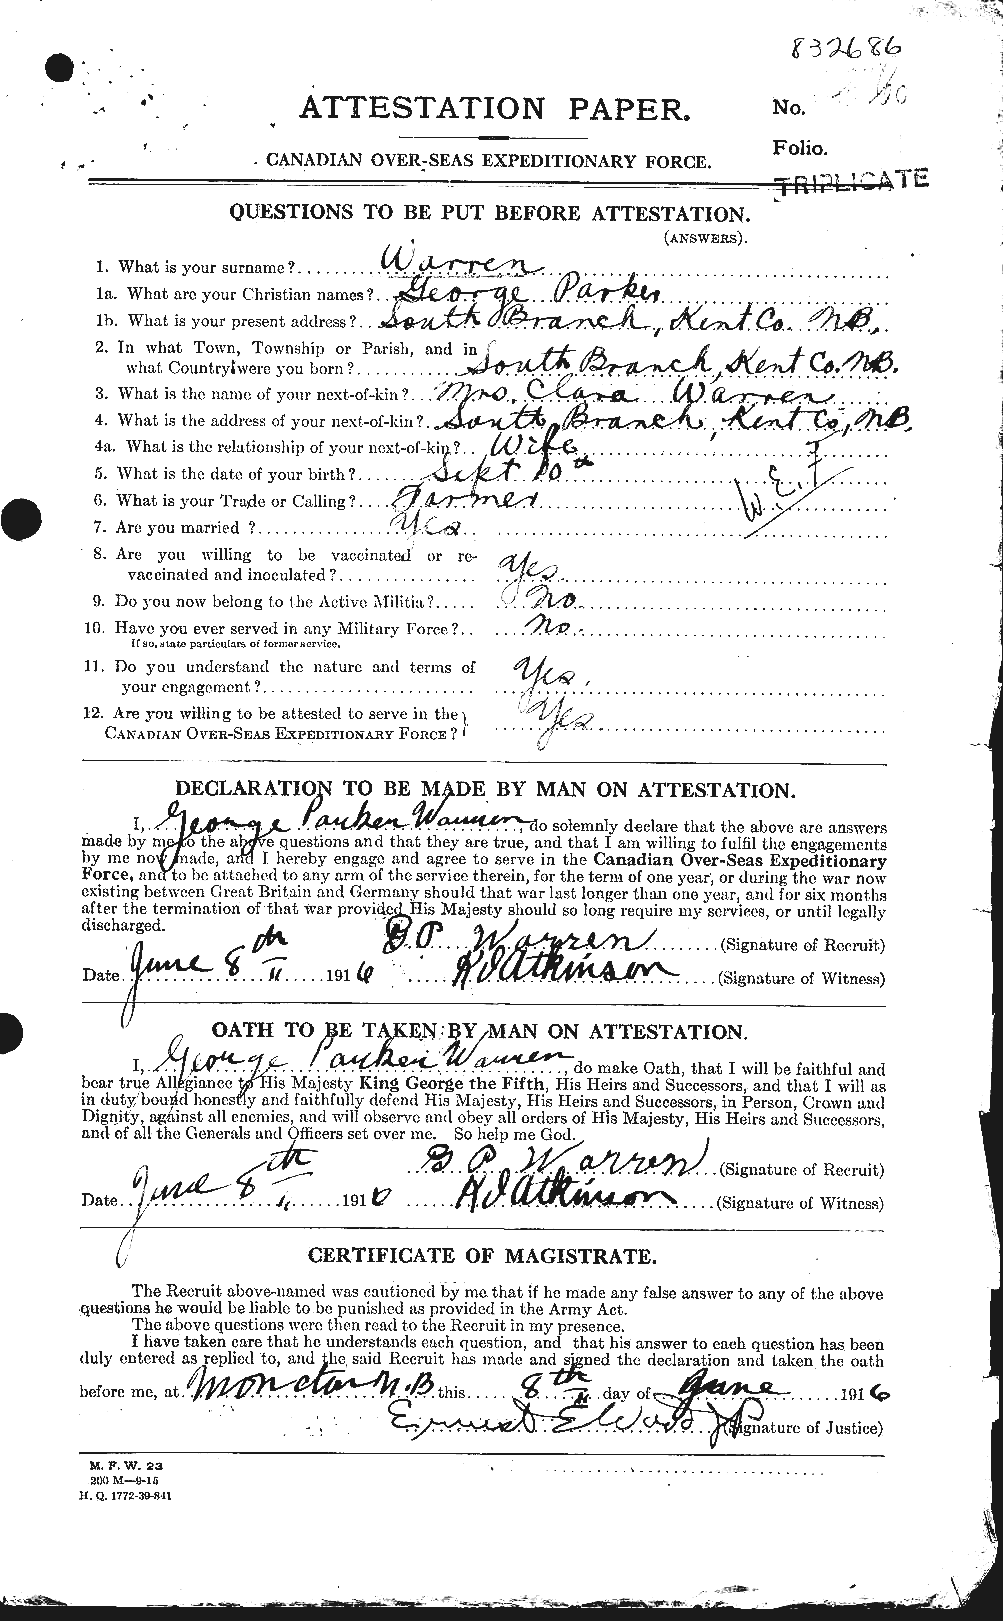 Personnel Records of the First World War - CEF 658470a